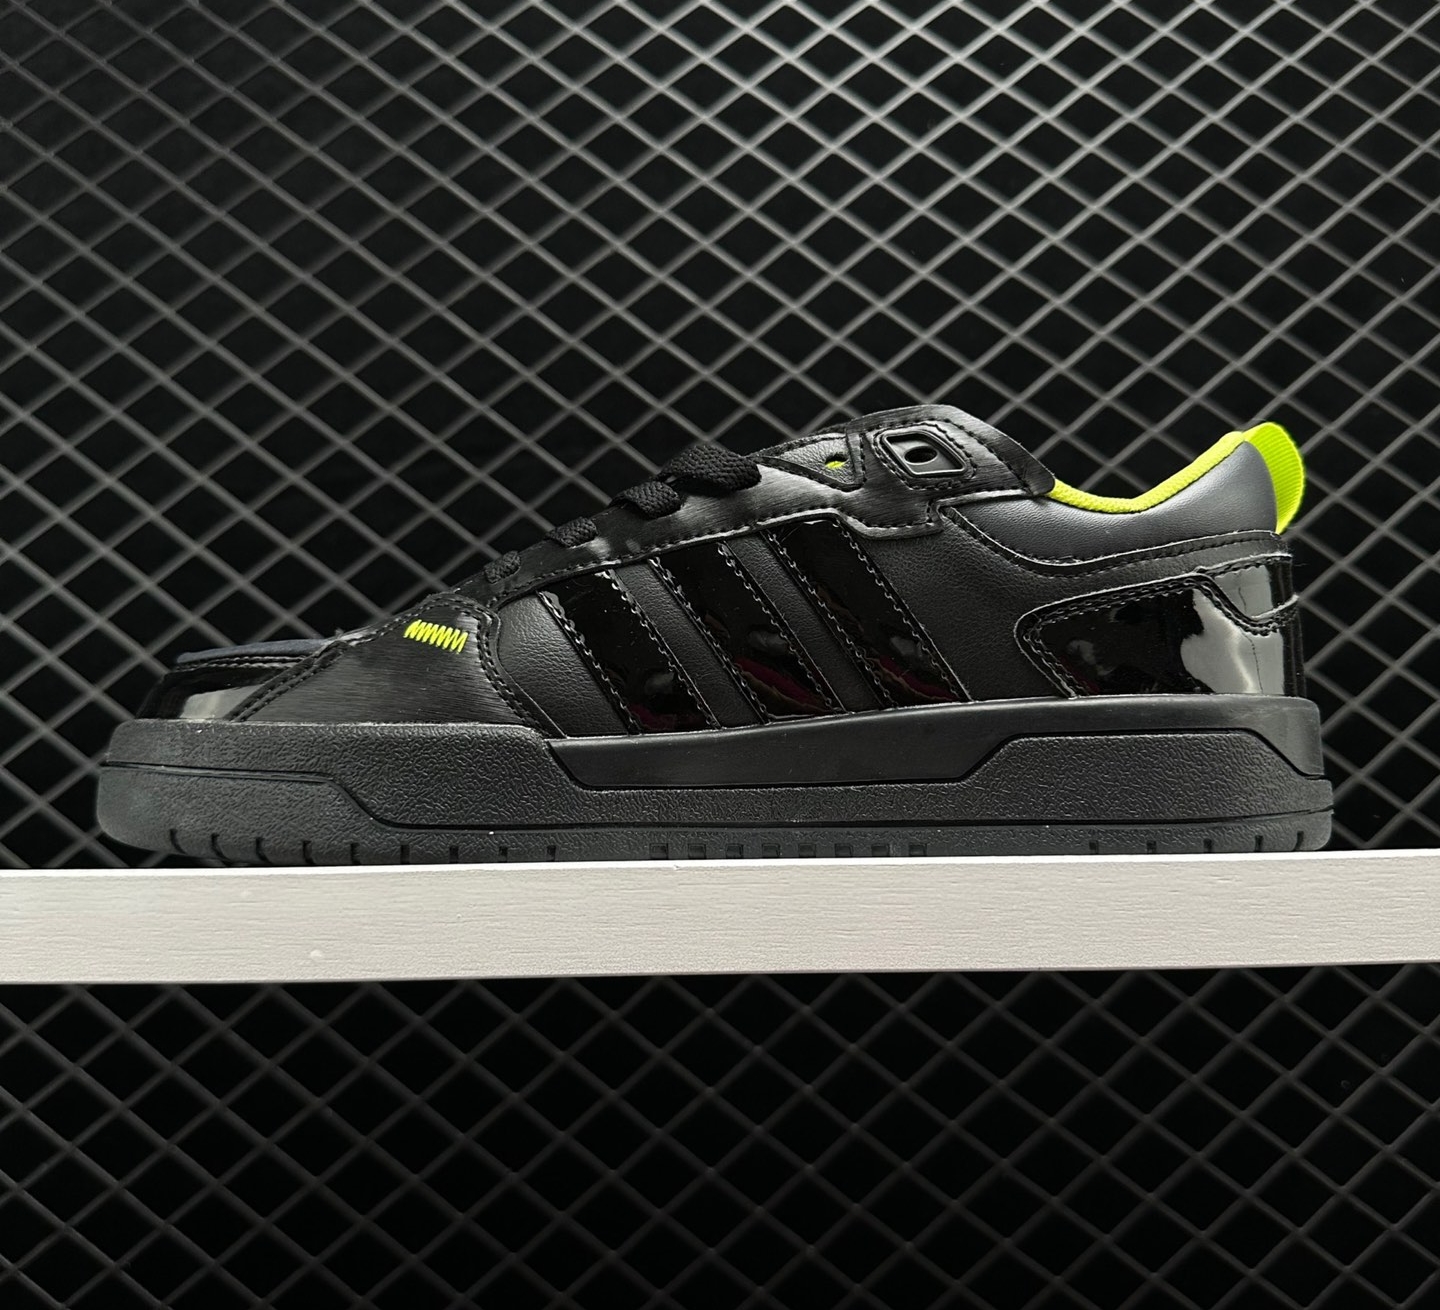 Adidas Neo 100DB Lifestyle 'Solar Yellow' - Boost Your Style with These Vibrant Sneakers